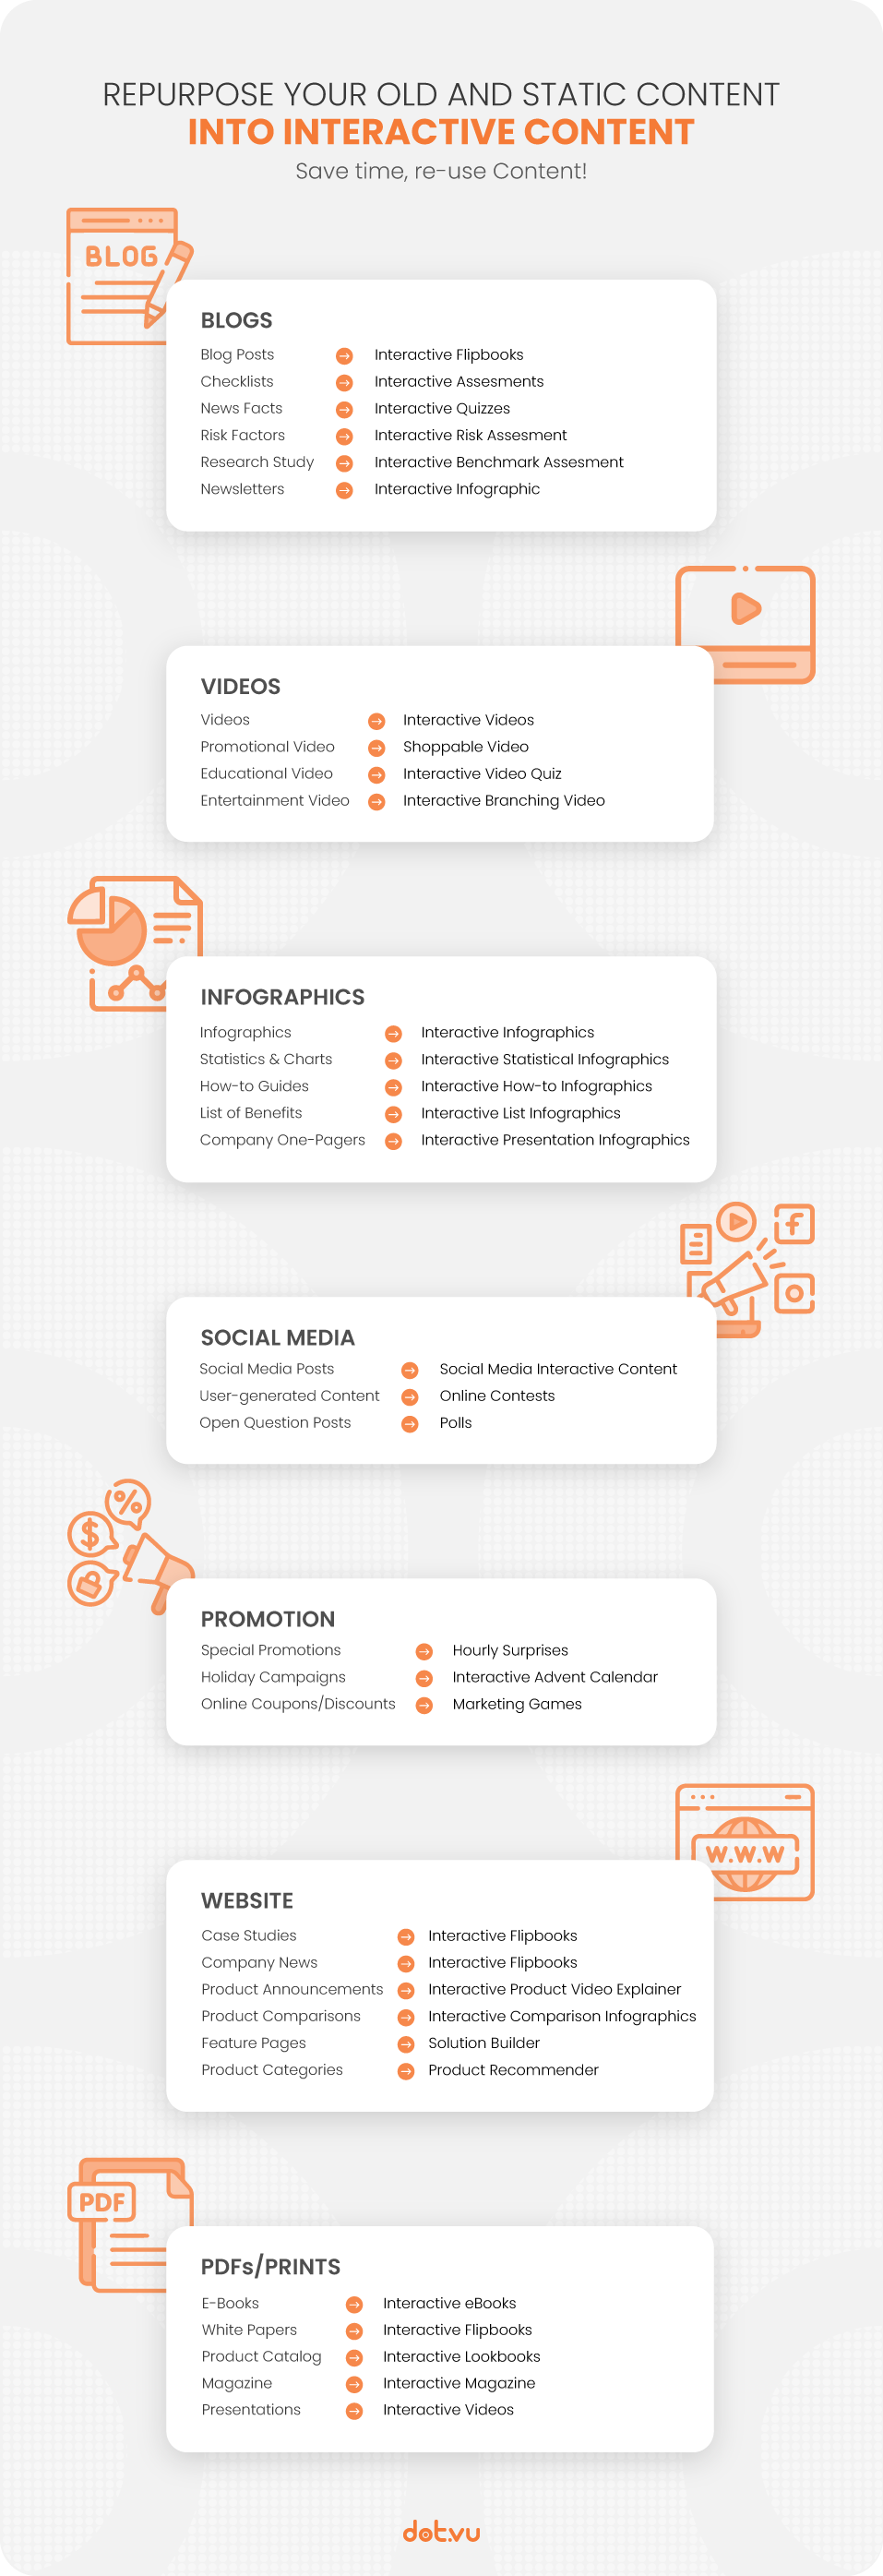 Repurpose your old and static content into Interactive Content Save time, re-use content!  Repurpose Content  Repurpose blog content  Repurpose video content Repurpose infographic content Repurpose Social Media content  Repurpose website content  Repurpose promotional content  Repurpose PDFs content